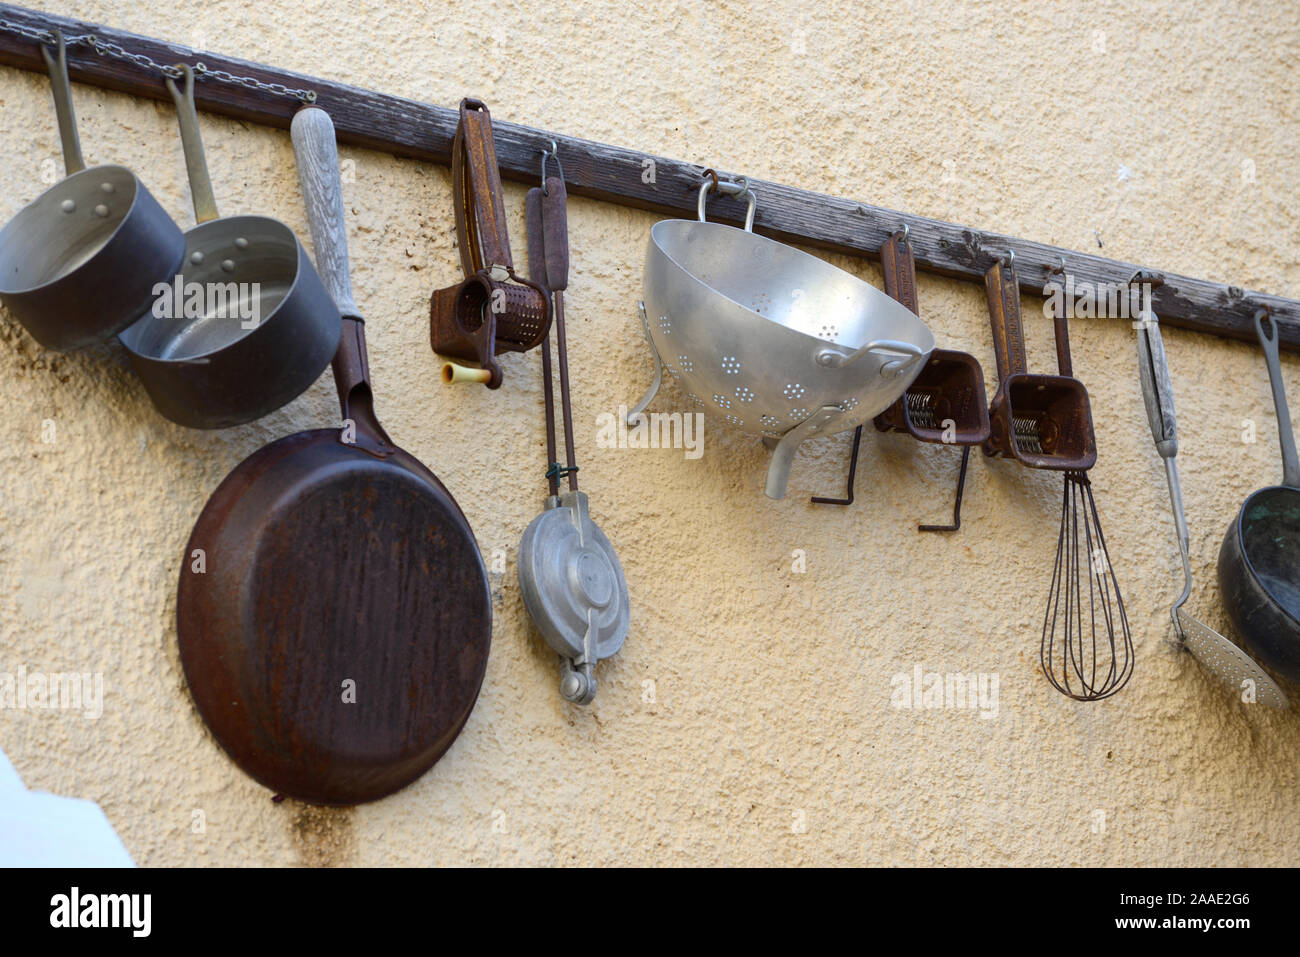 Professional Cooking Utensils Hanging Restaurant Kitchen Stock Photo by  ©.shock 193223954